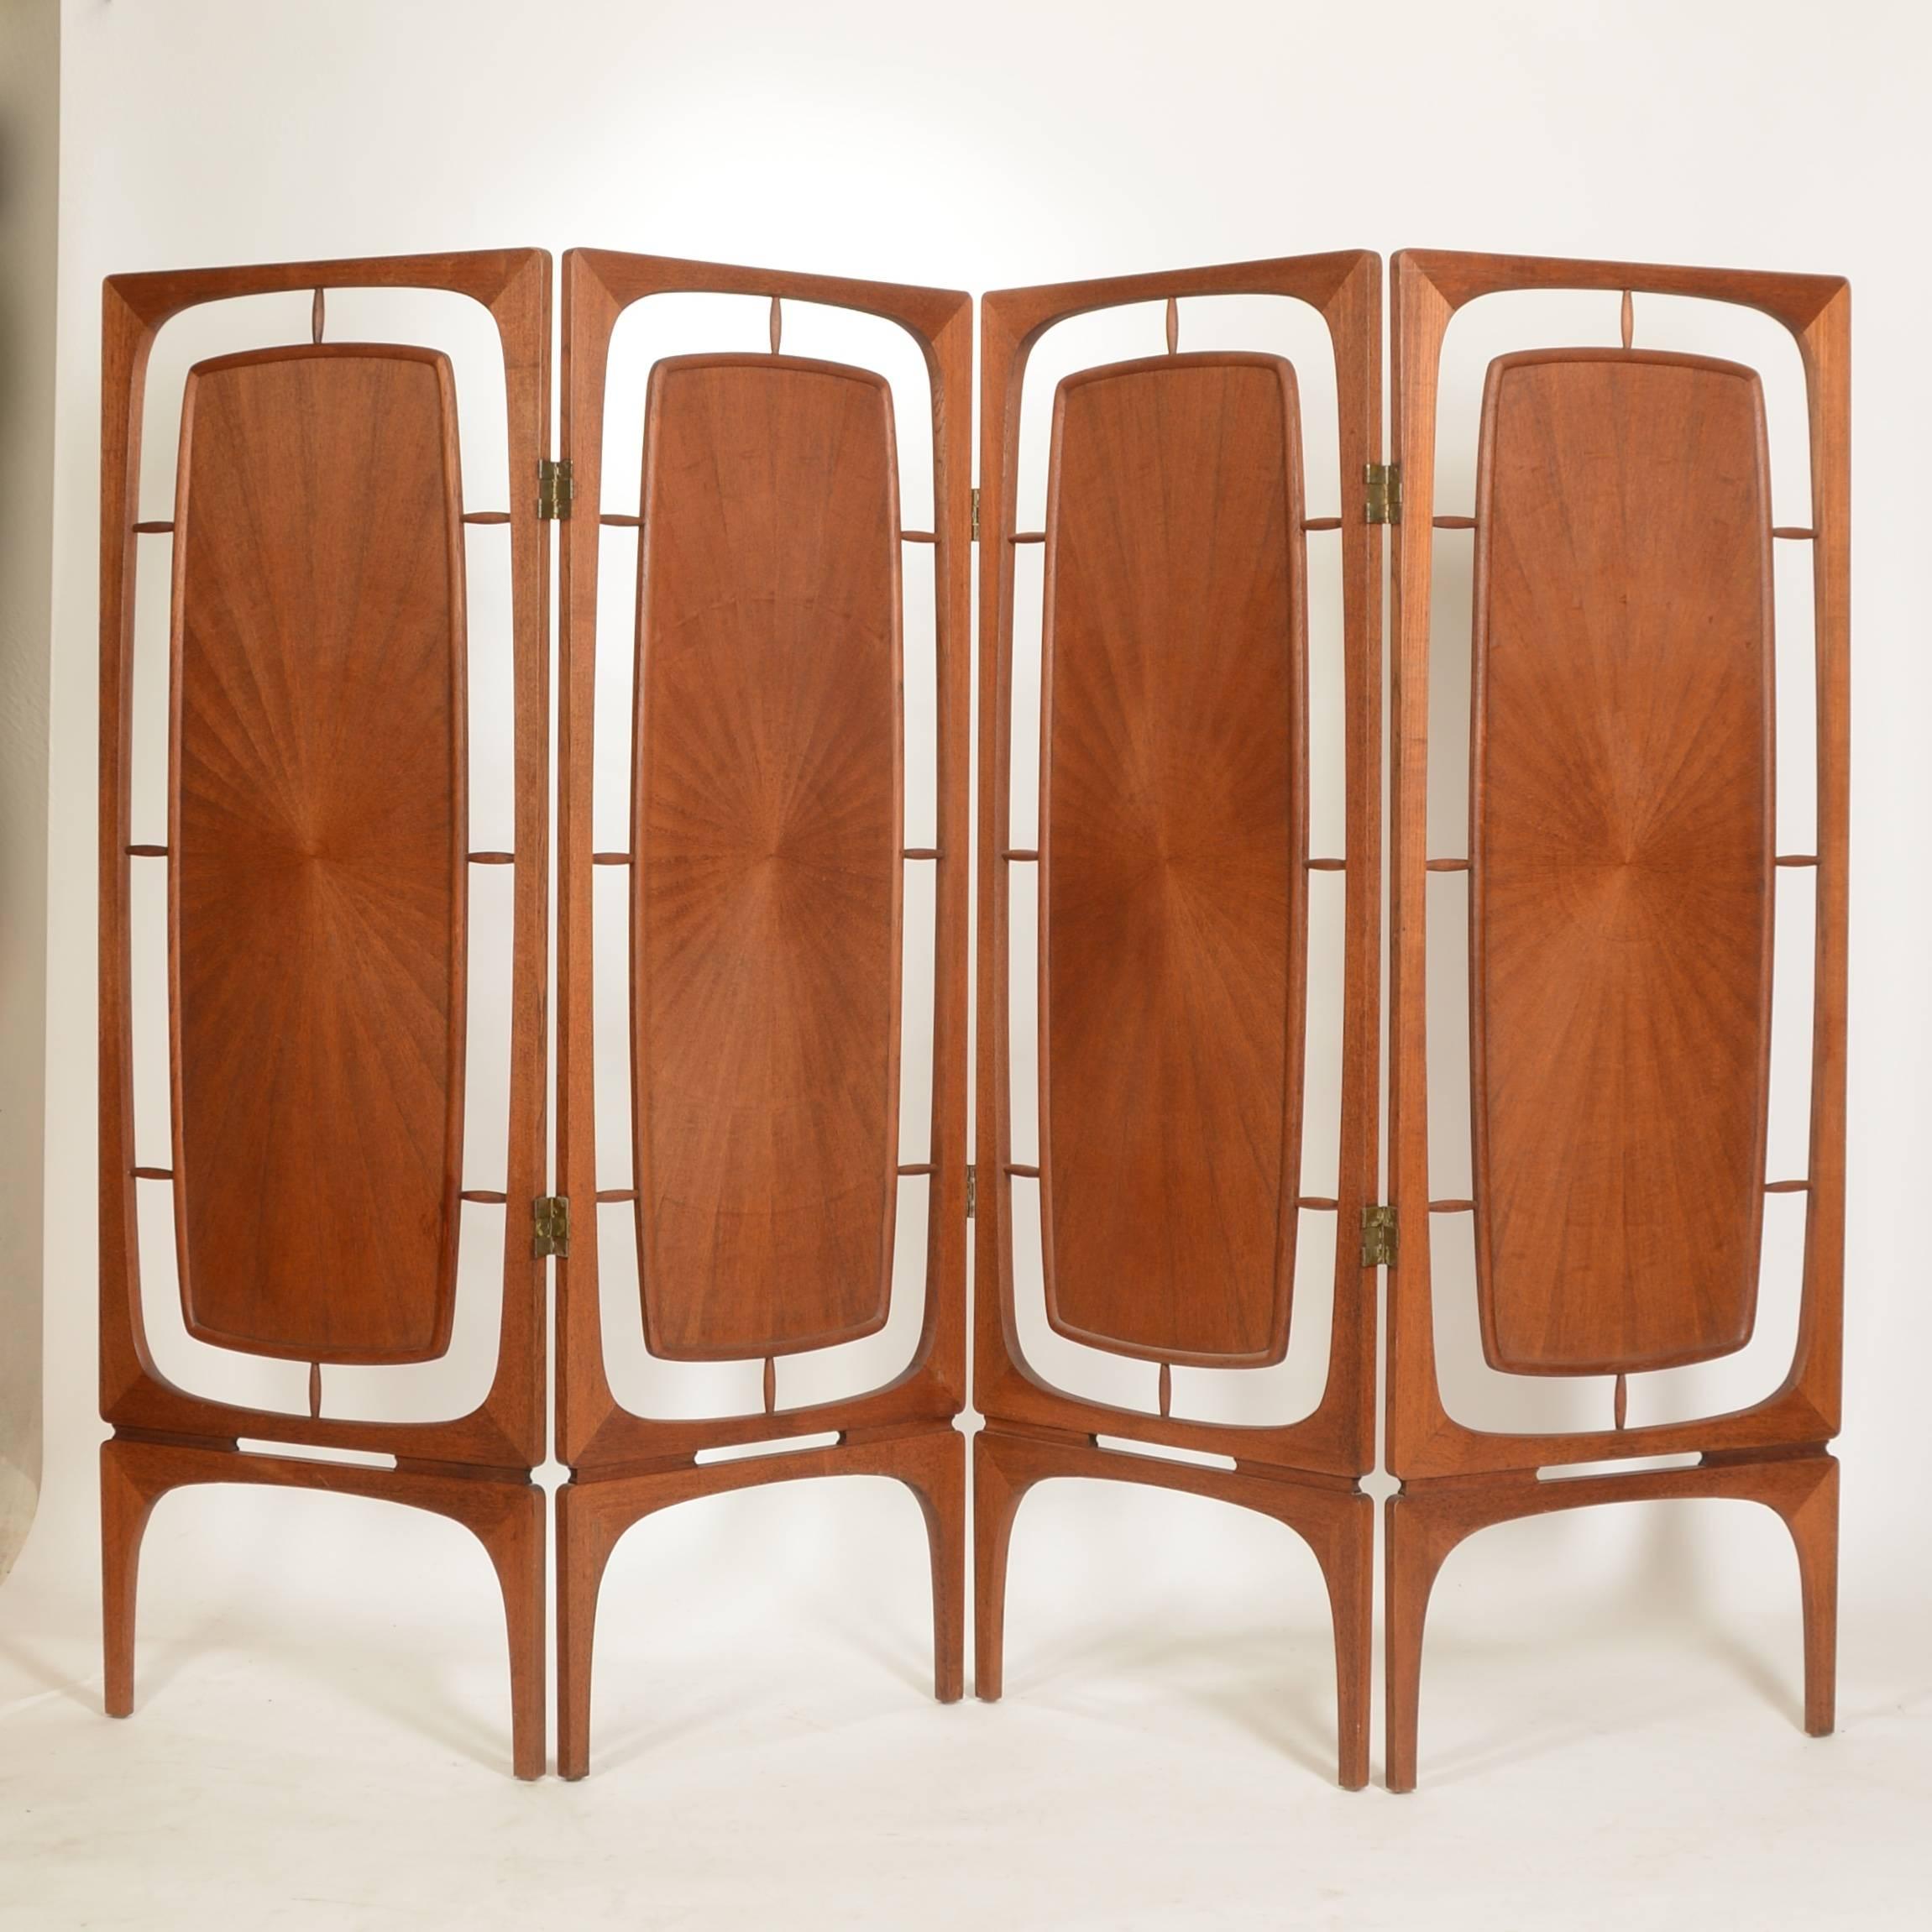 This is a beautiful and rare teak four-panel folding screen from Denmark, circa 1950.  Made from hand formed solid teak frames with radiating bookmarked veneer inserts and carved reliefs.  The condition is excellent. 